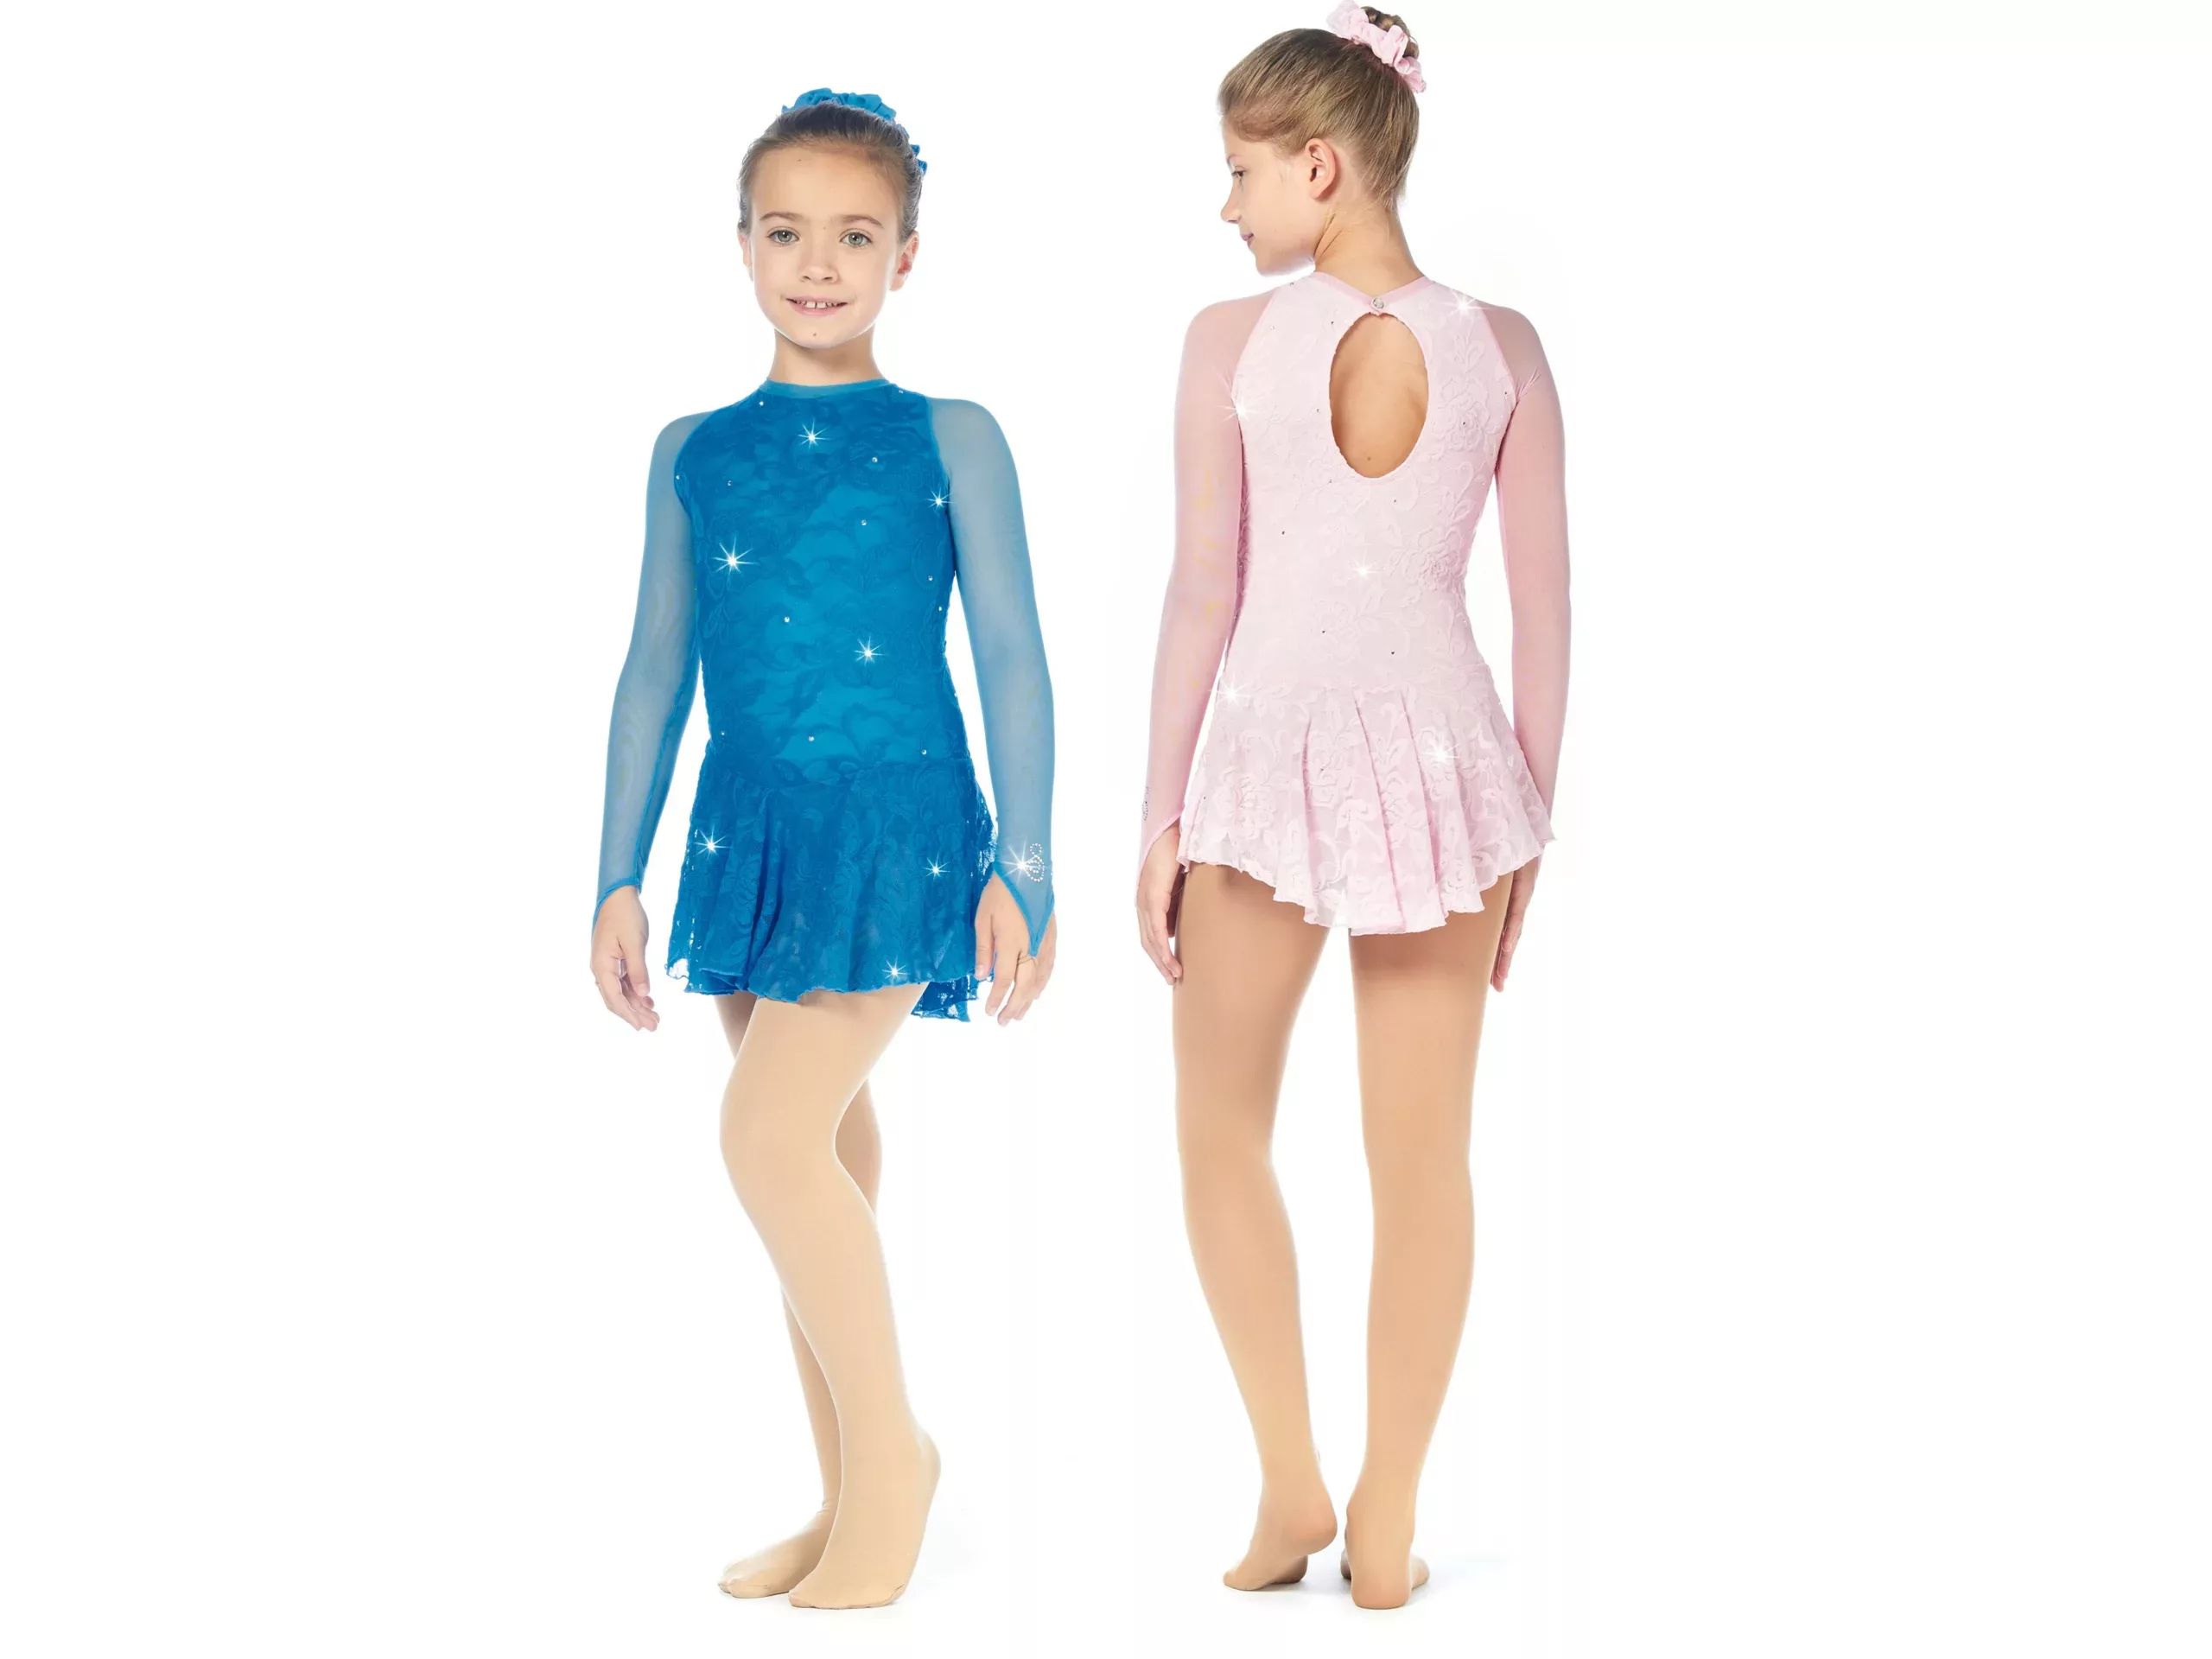 Robe de patinage artistique Sagester Style : 194, turquoise Robes